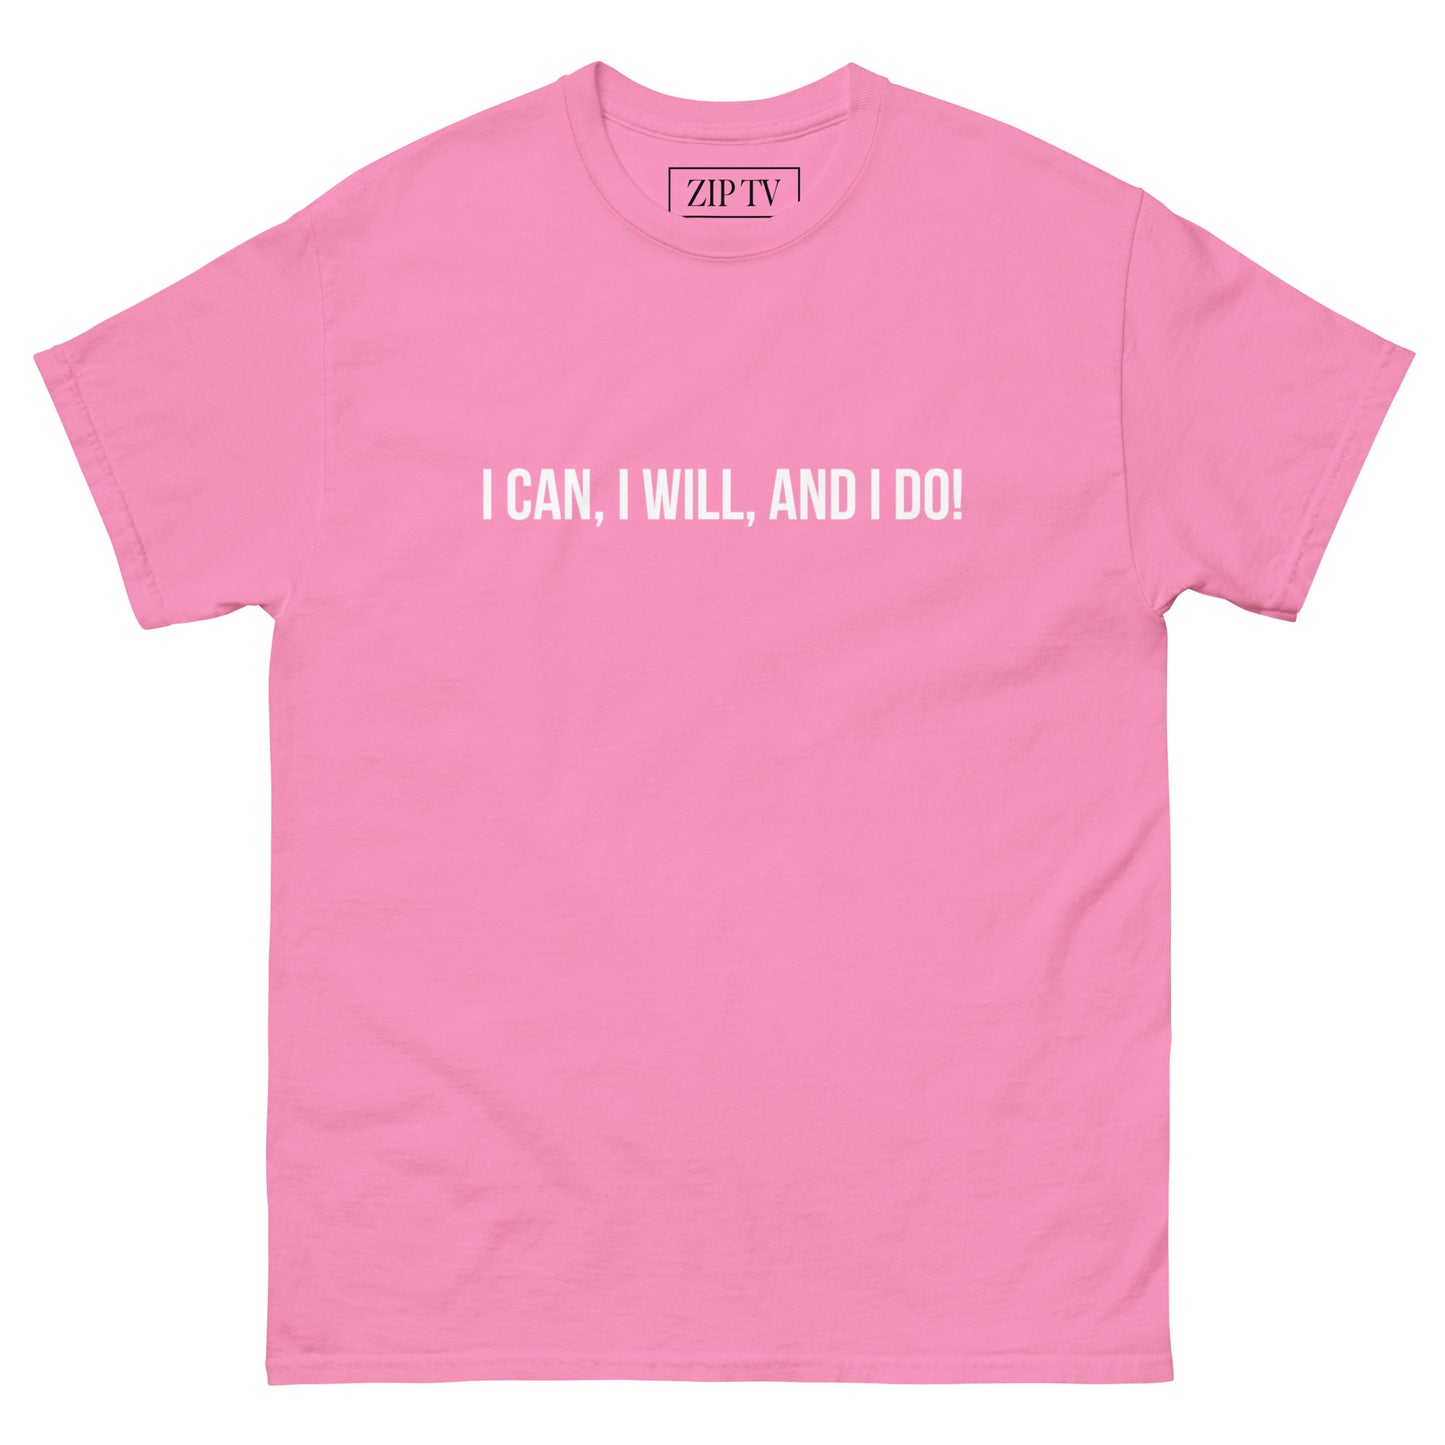 I CAN, I WILL, AND I DO - Classic Tee